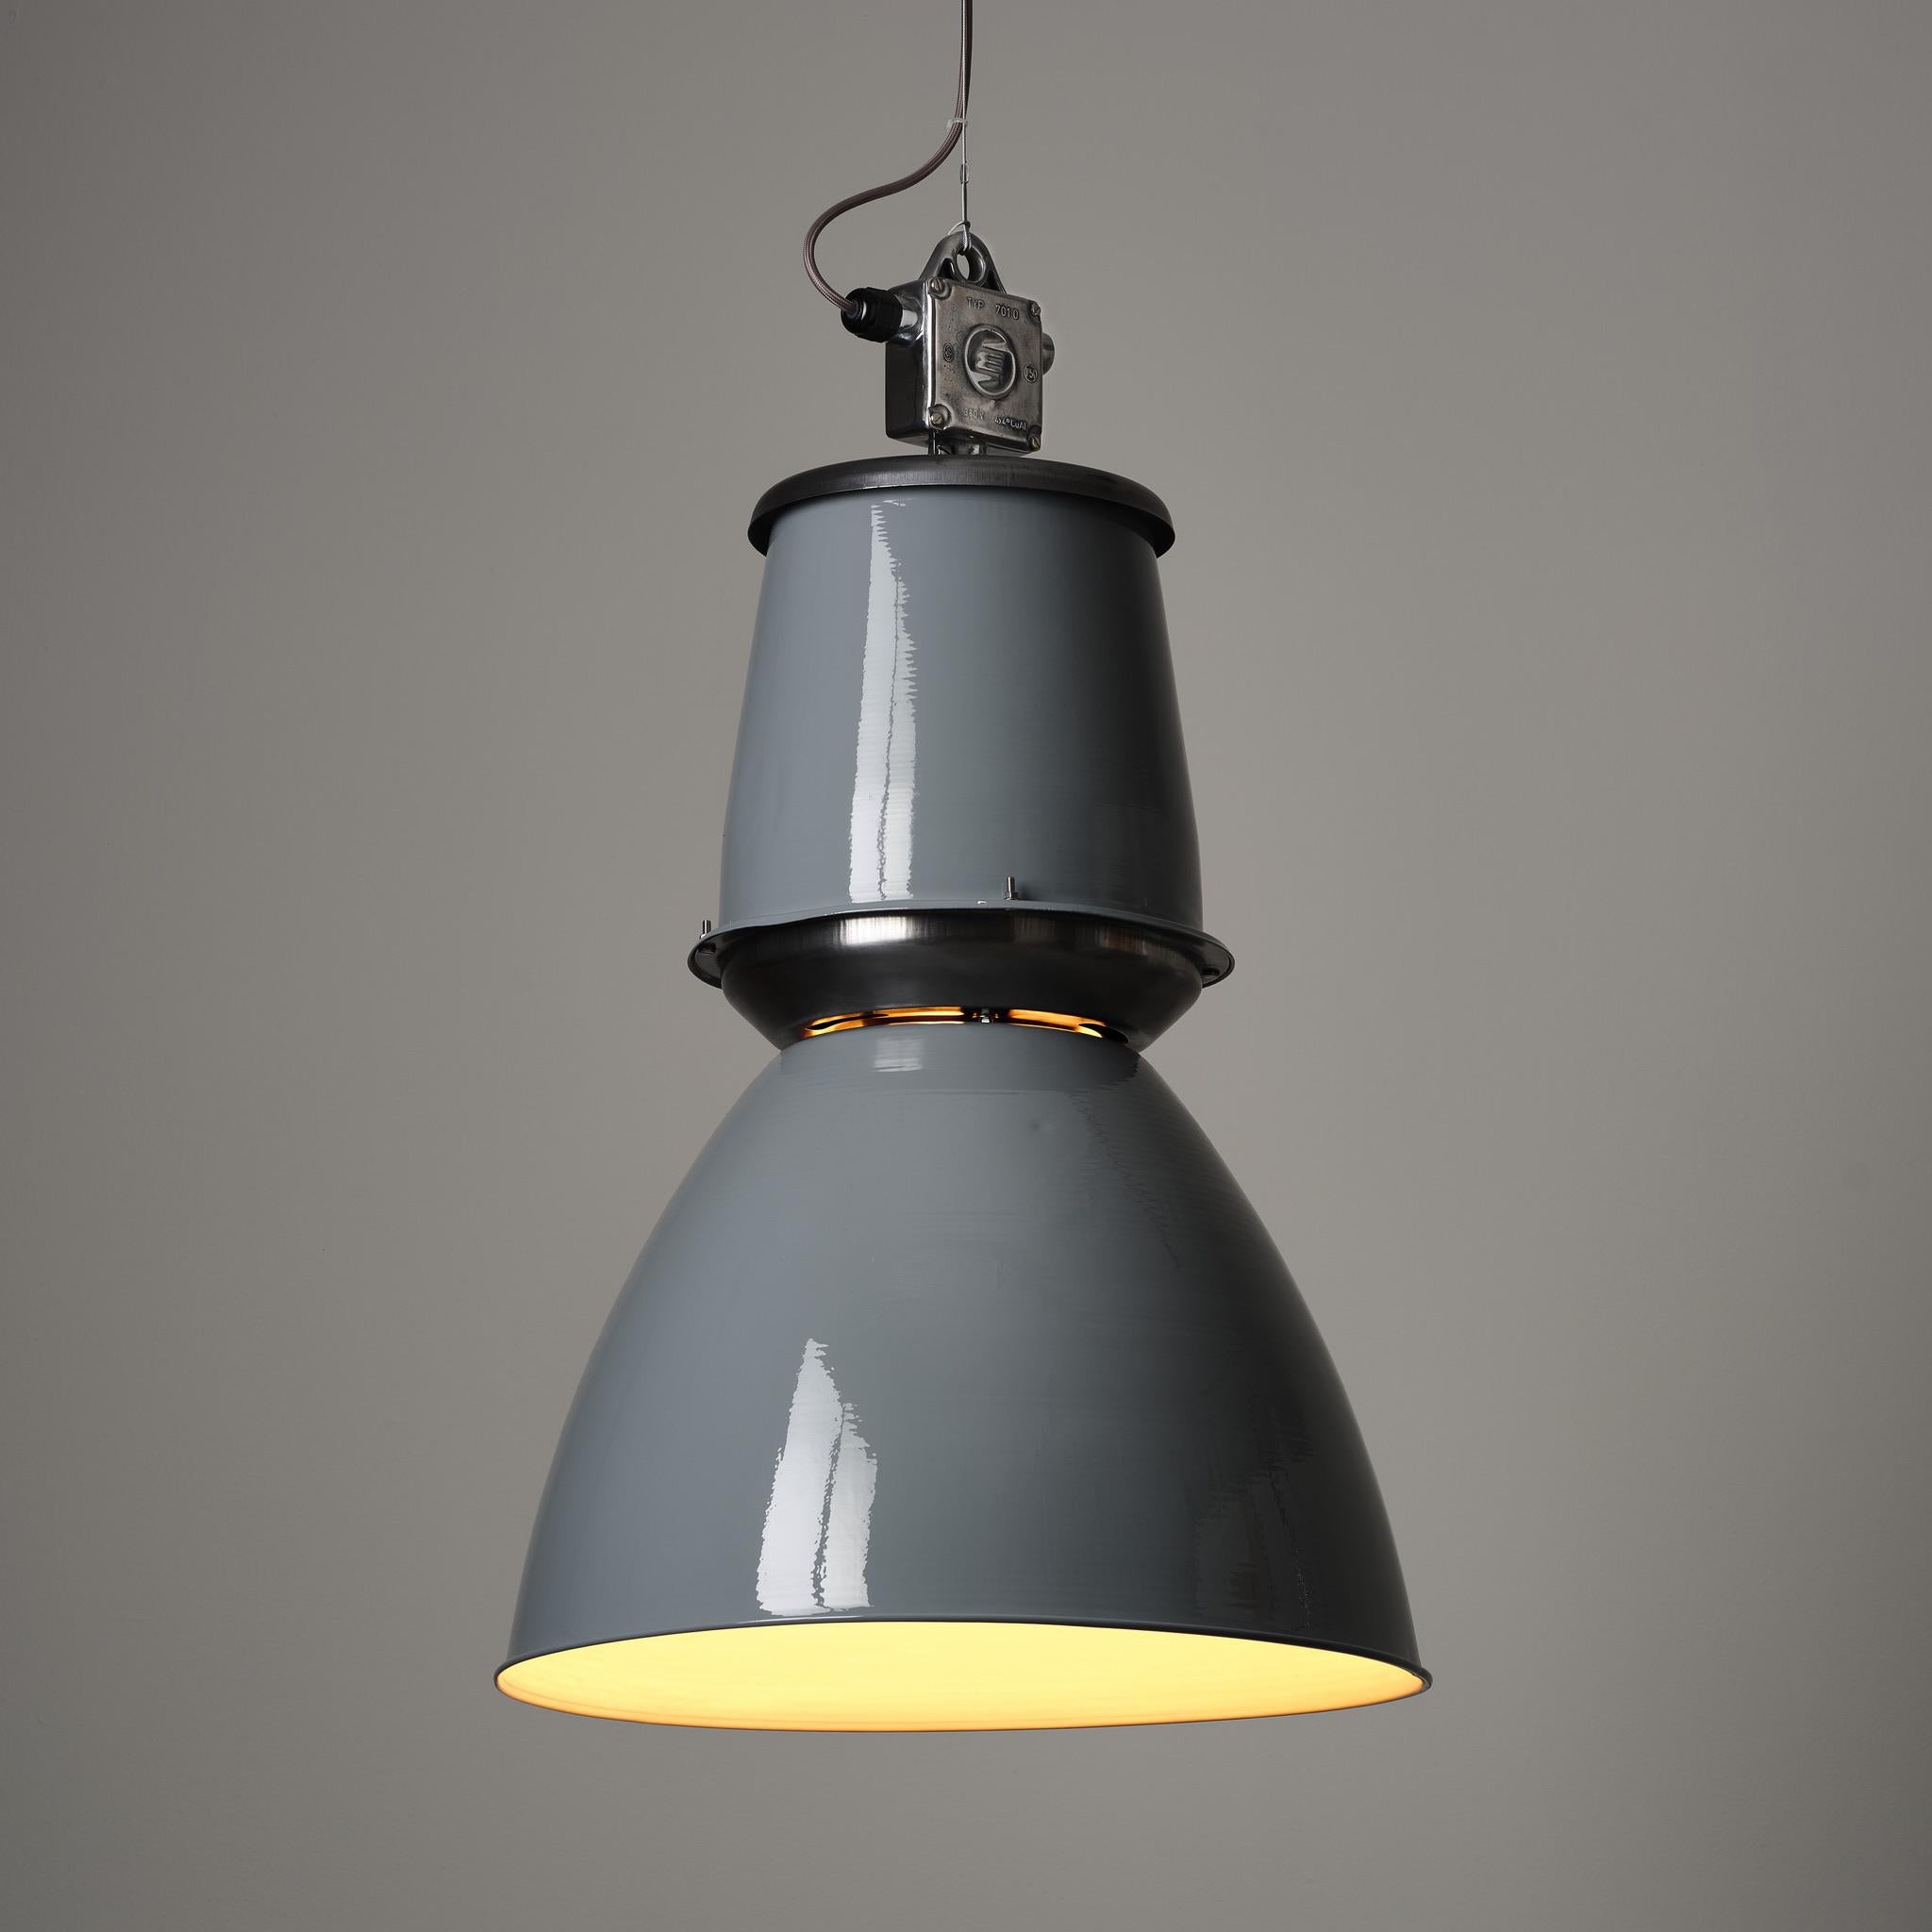 Steel Vintage Giant Czech Pendant Light - Reconditioned Black/ Grey/ White For Sale